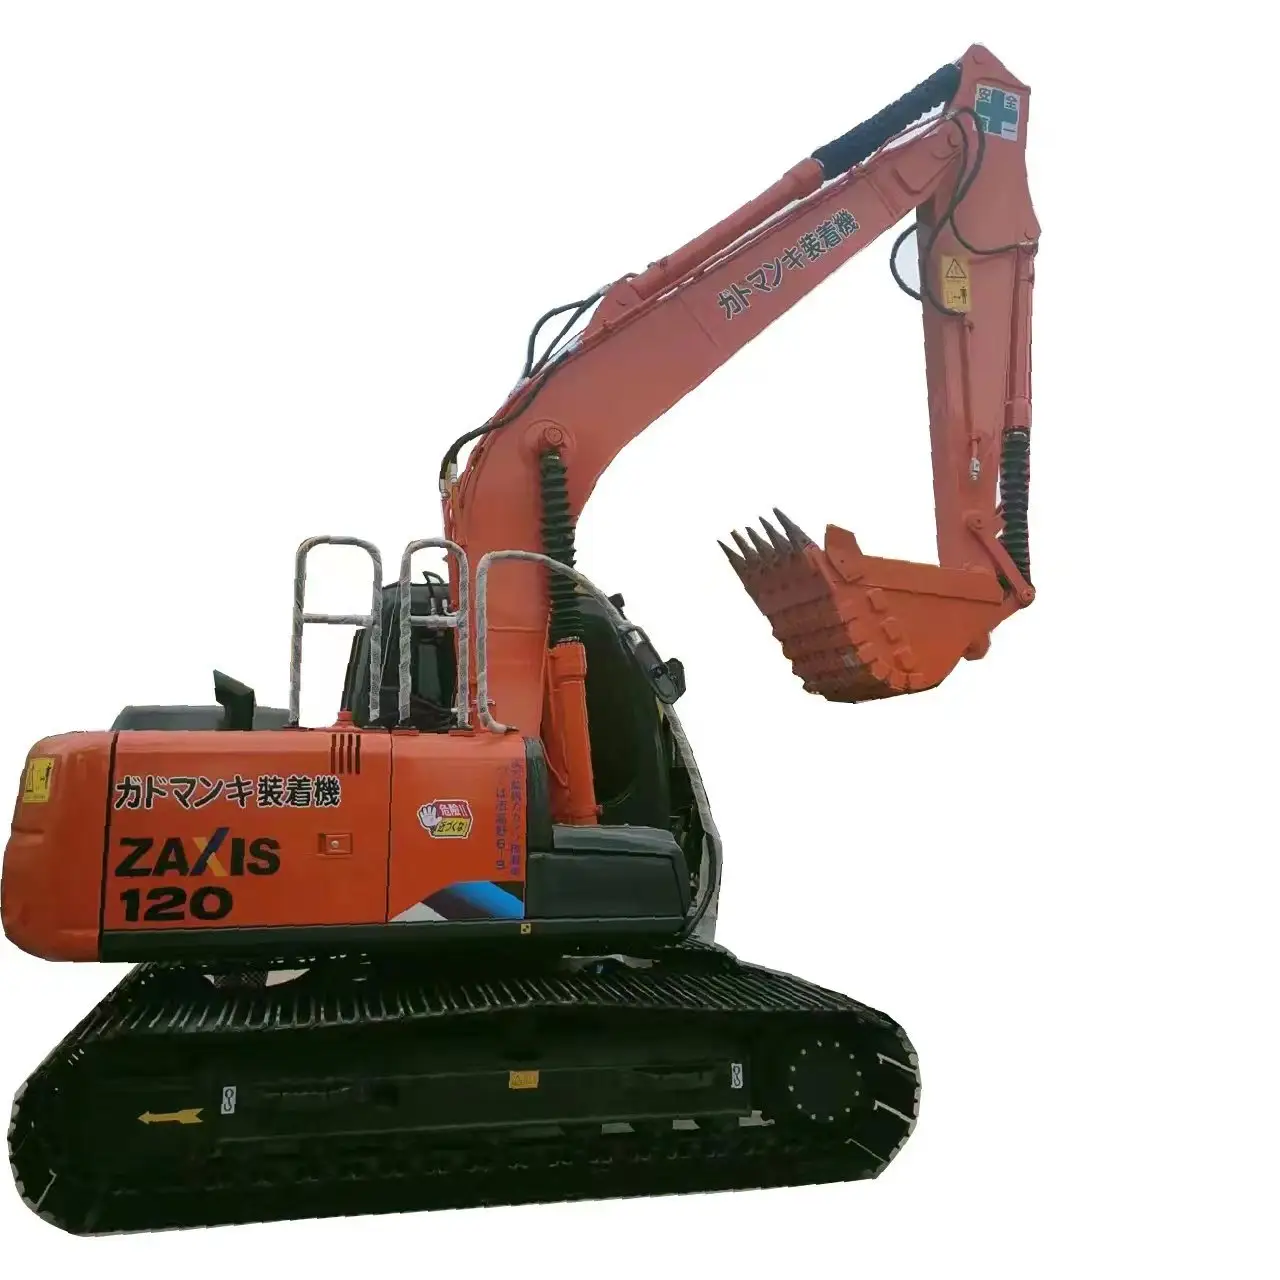 Japan imported used hitachi excavator ZX120 in good condition